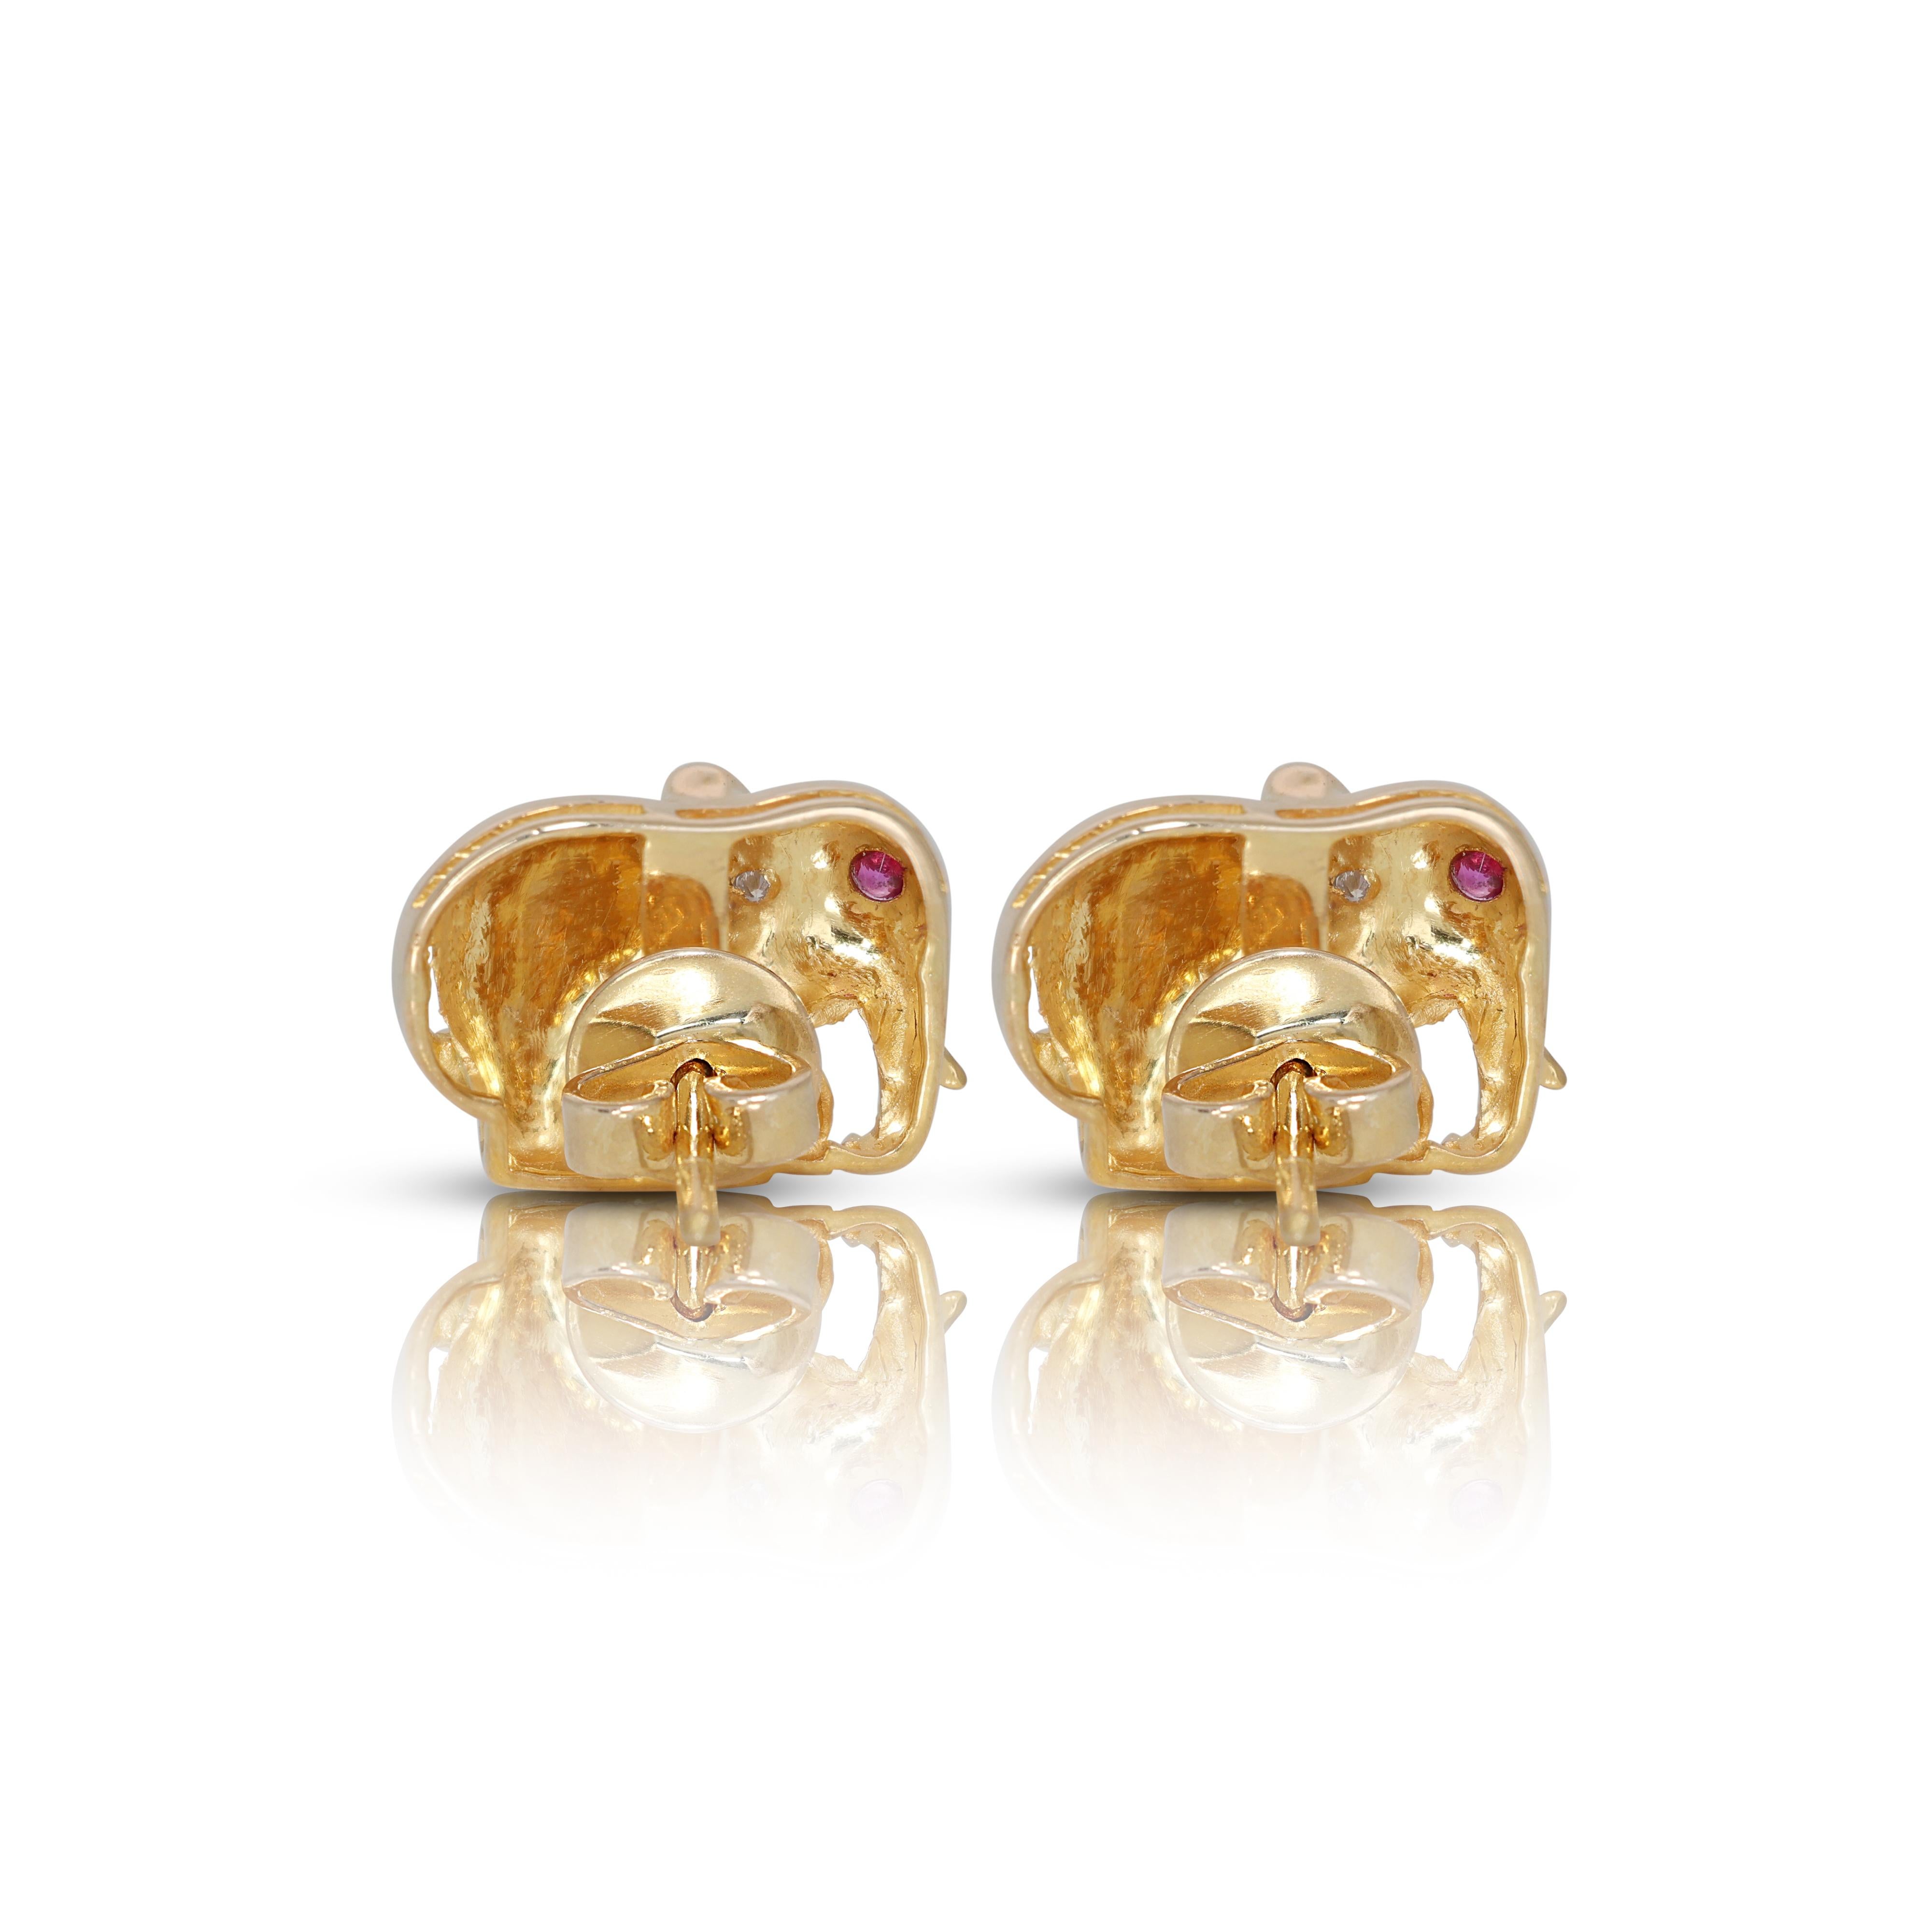 Elegant 0.07ct Diamond Elephant Stud Earrings with Rubies in 18K Yellow Gold In Excellent Condition For Sale In רמת גן, IL